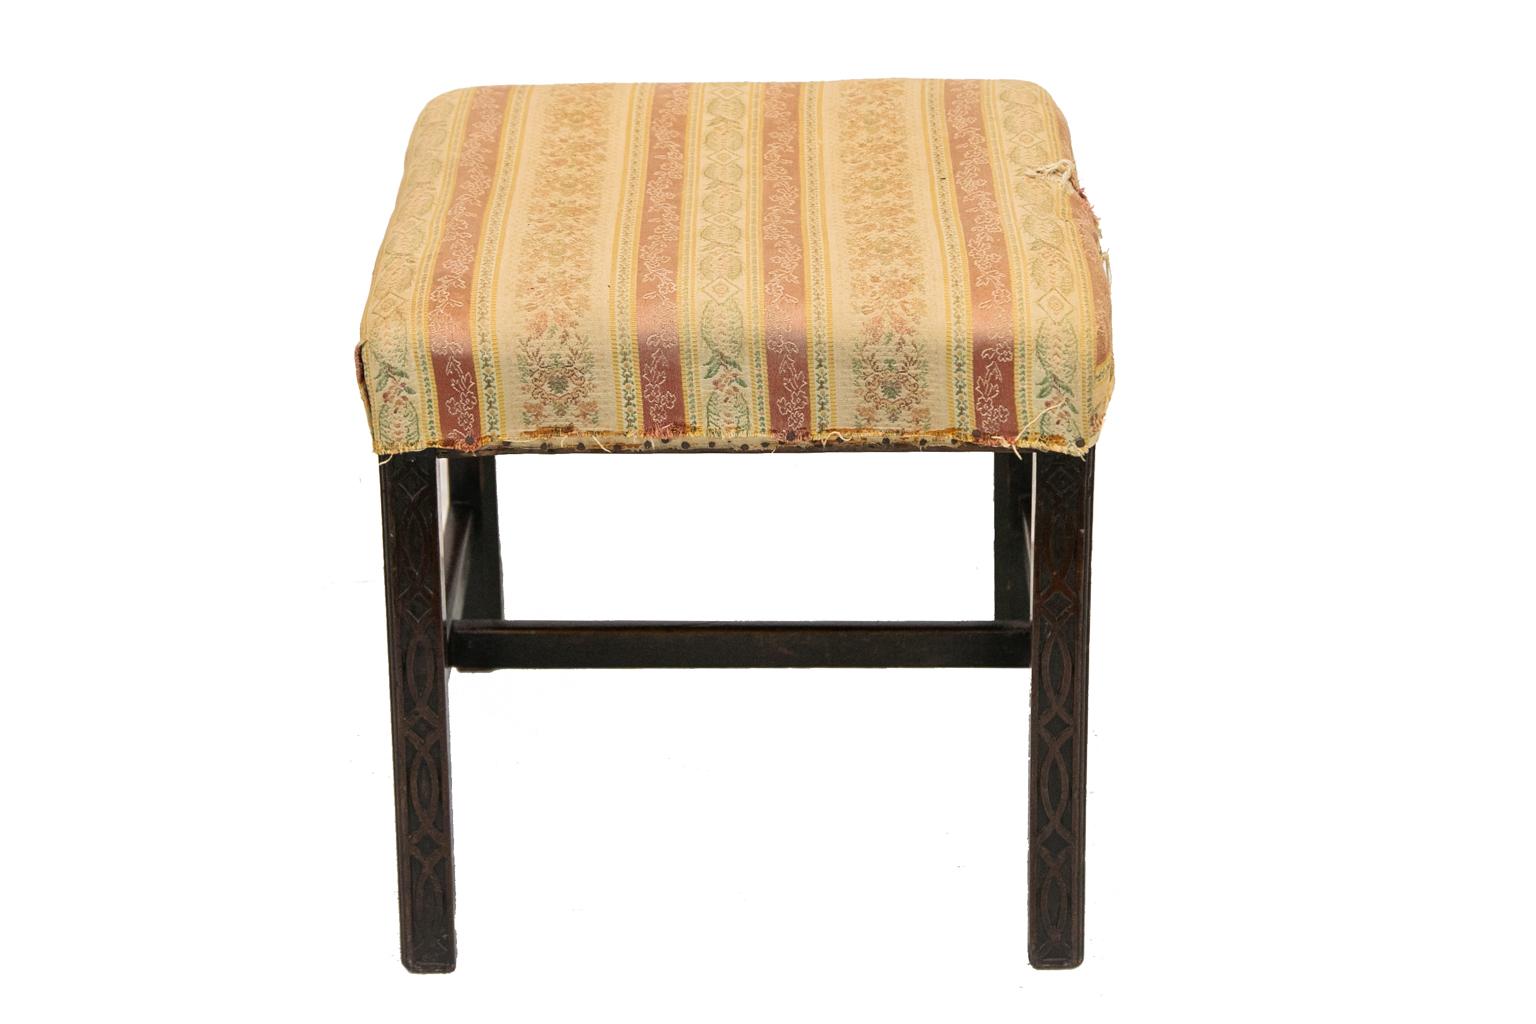 This carved English Chippendale stool has all of its original four glue blocks underneath with four 19th century reinforcements added. The legs are carved with beaded corners and interlaced blind fretwork on all eight sides. The legs are supported